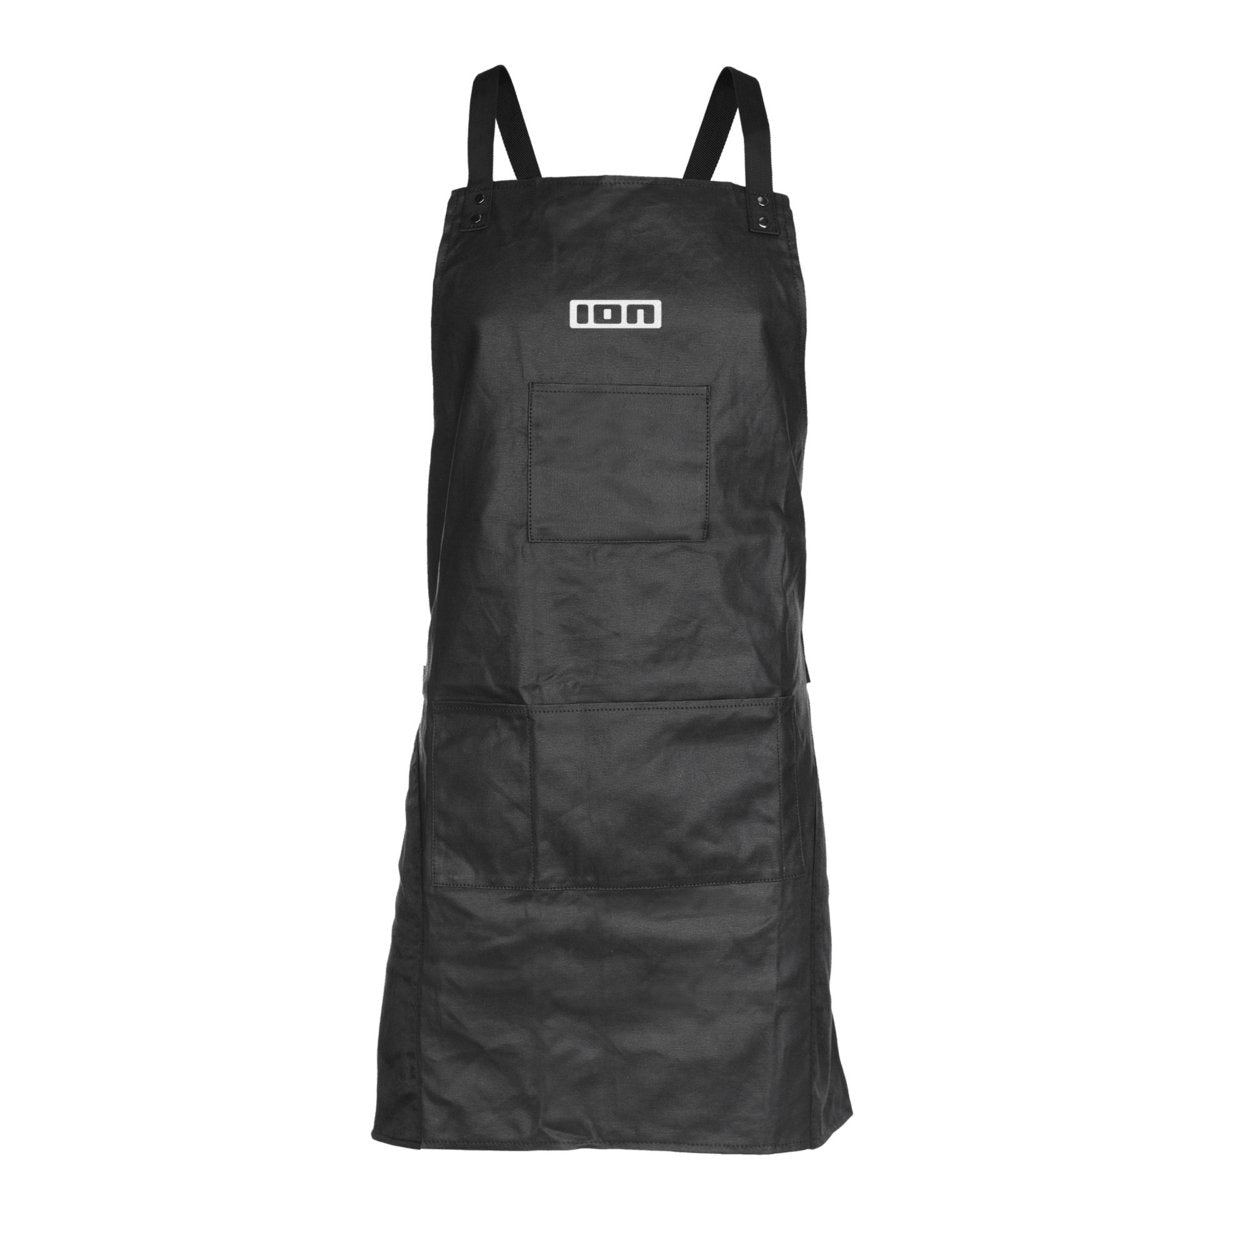 ION Apron 2024 - Worthing Watersports - 9008415531615 - Accessories - ION Bike